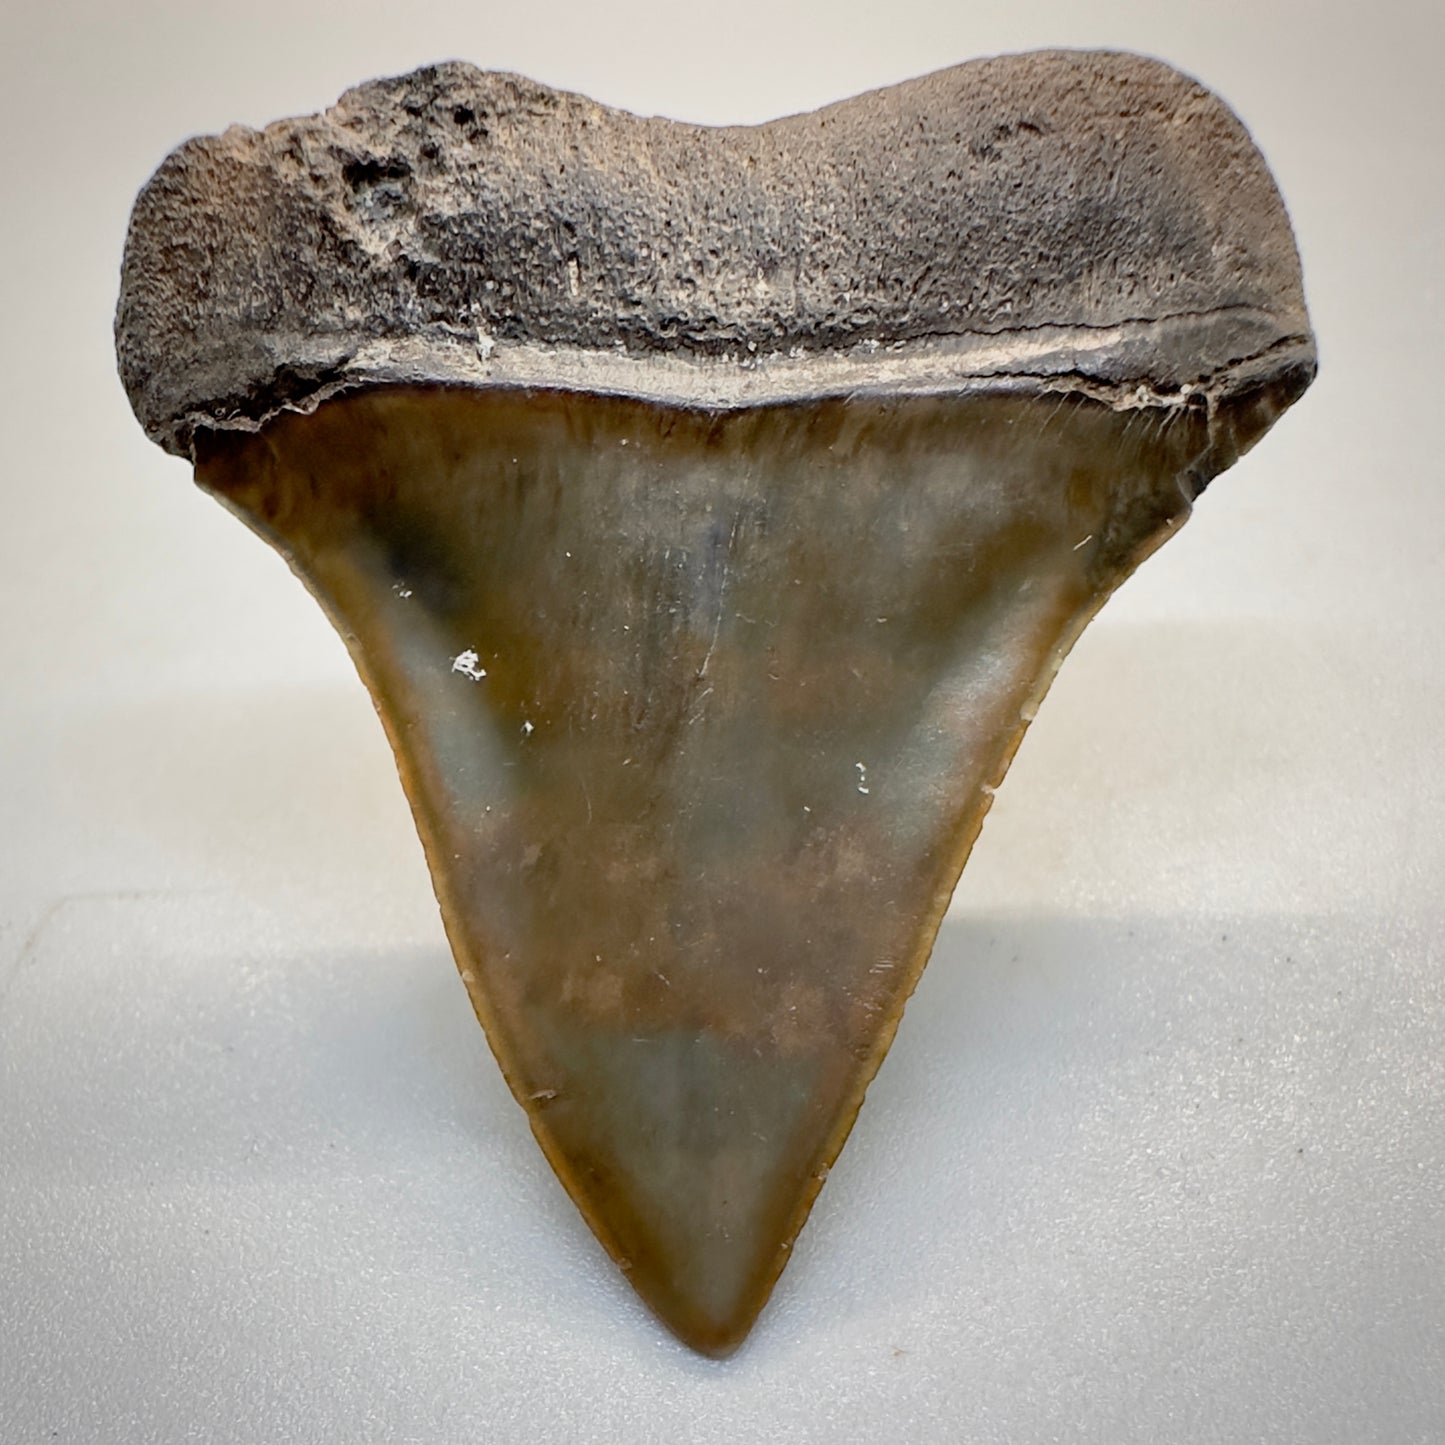 1.74 inches colorful Extinct Mako - isurus hastalis shark tooth from southeast, USA M511 back down